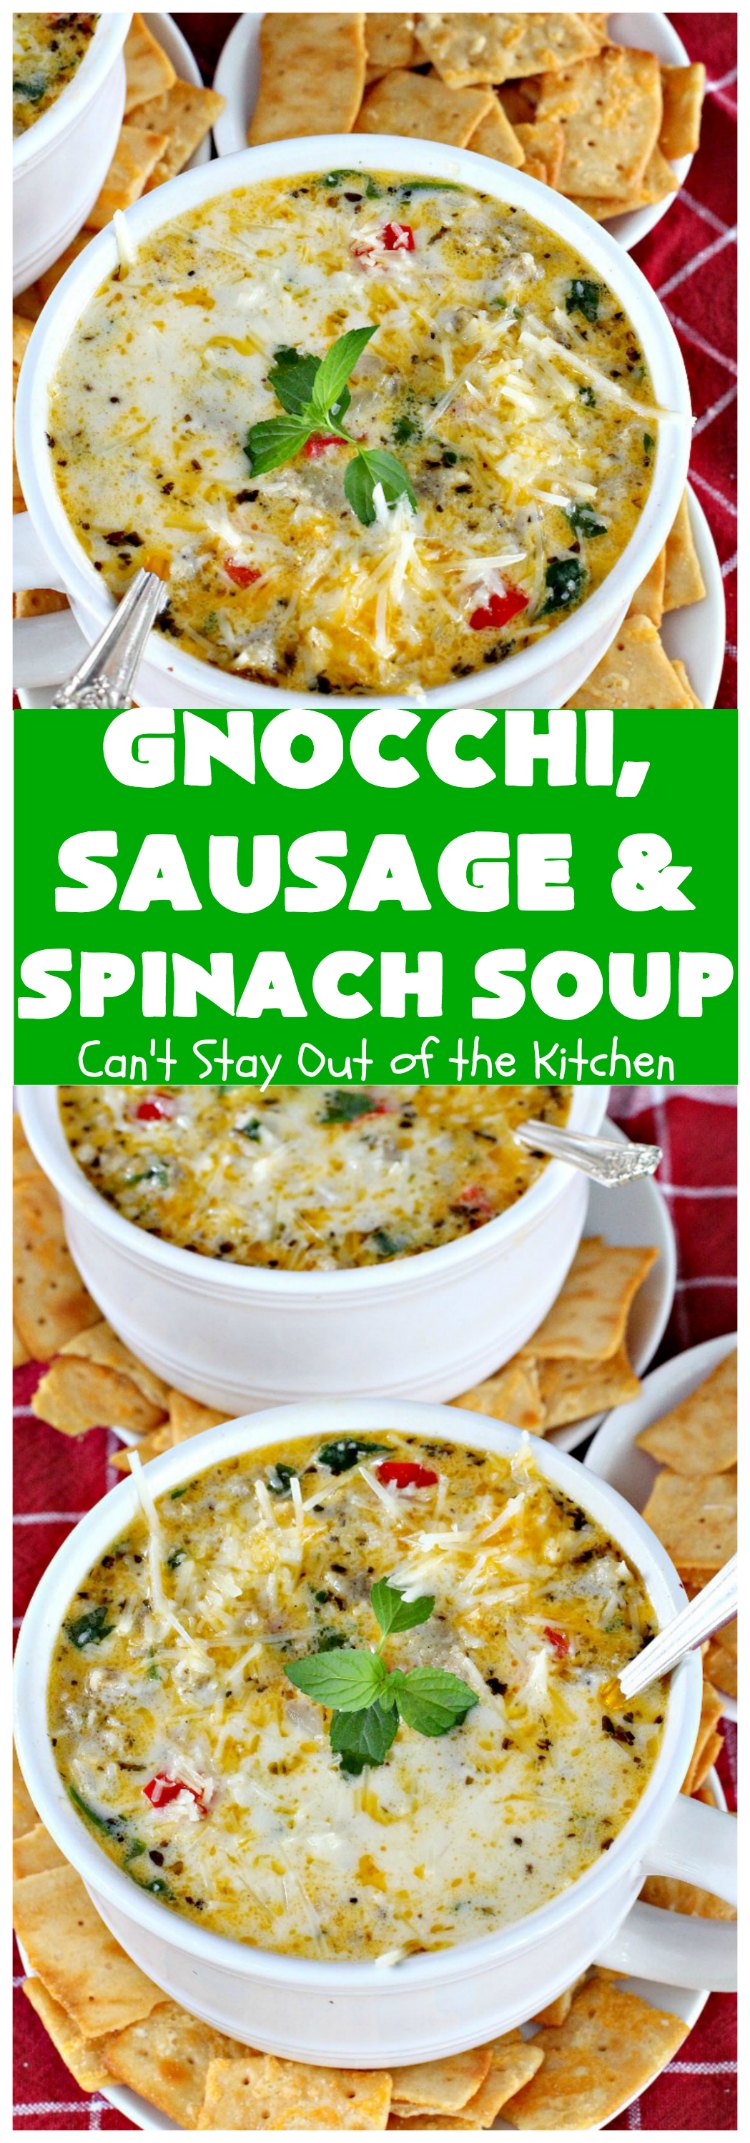 Gnocchi, Sausage & Spinach Soup | Can't Stay Out of the Kitchen